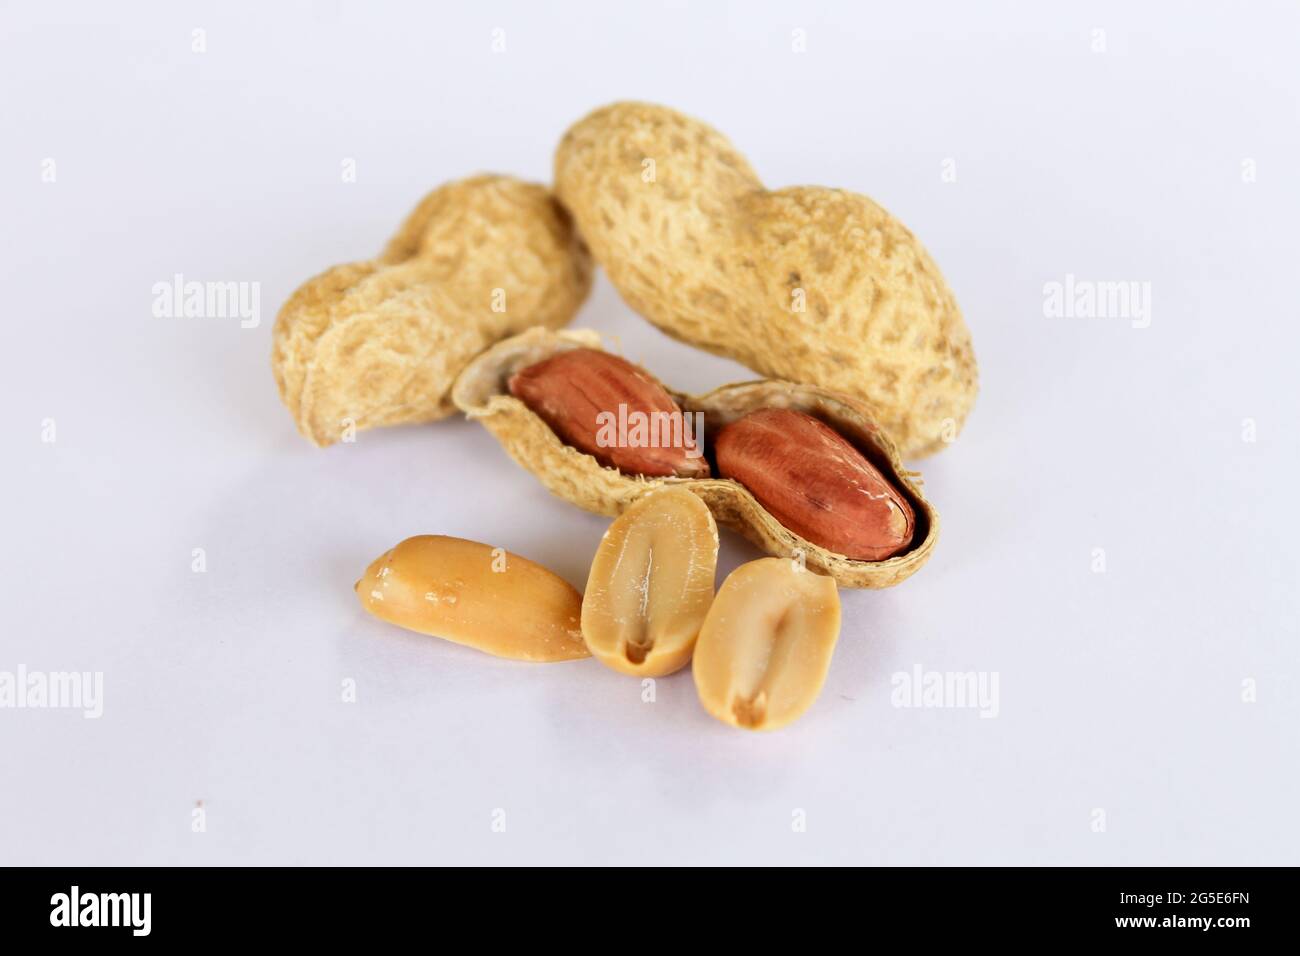 Peanuts isolated on white background . Two kernels are already unpacked. One of the peanuts unpacked reveals a red seed on the side. The seeds are sep Stock Photo